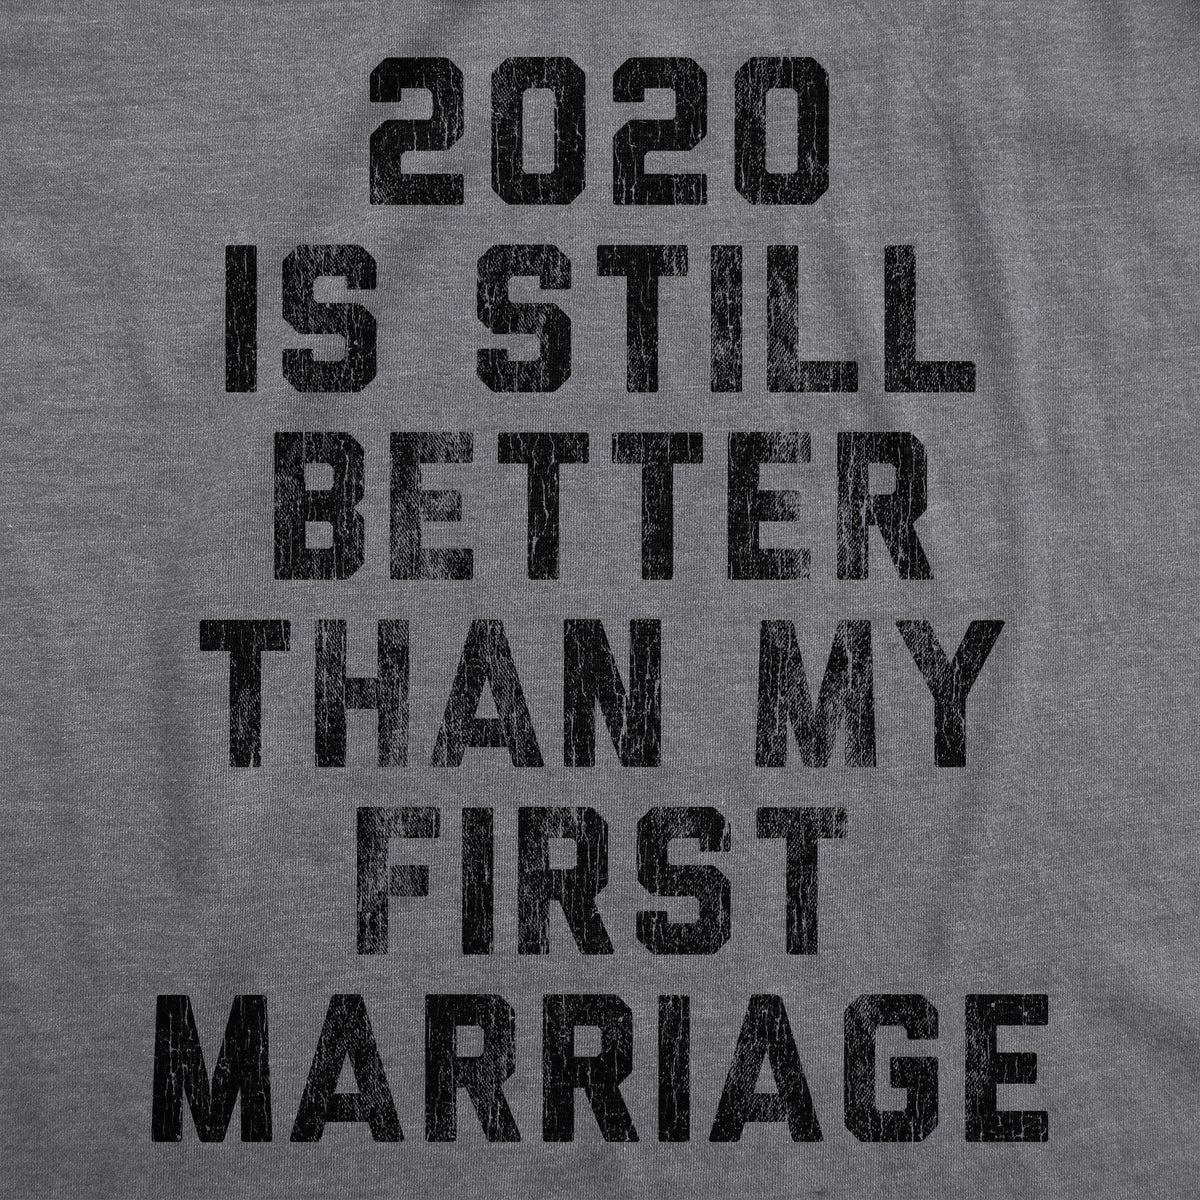 2020 Is Still Better Than My First Marriage Men&#39;s Tshirt - Crazy Dog T-Shirts